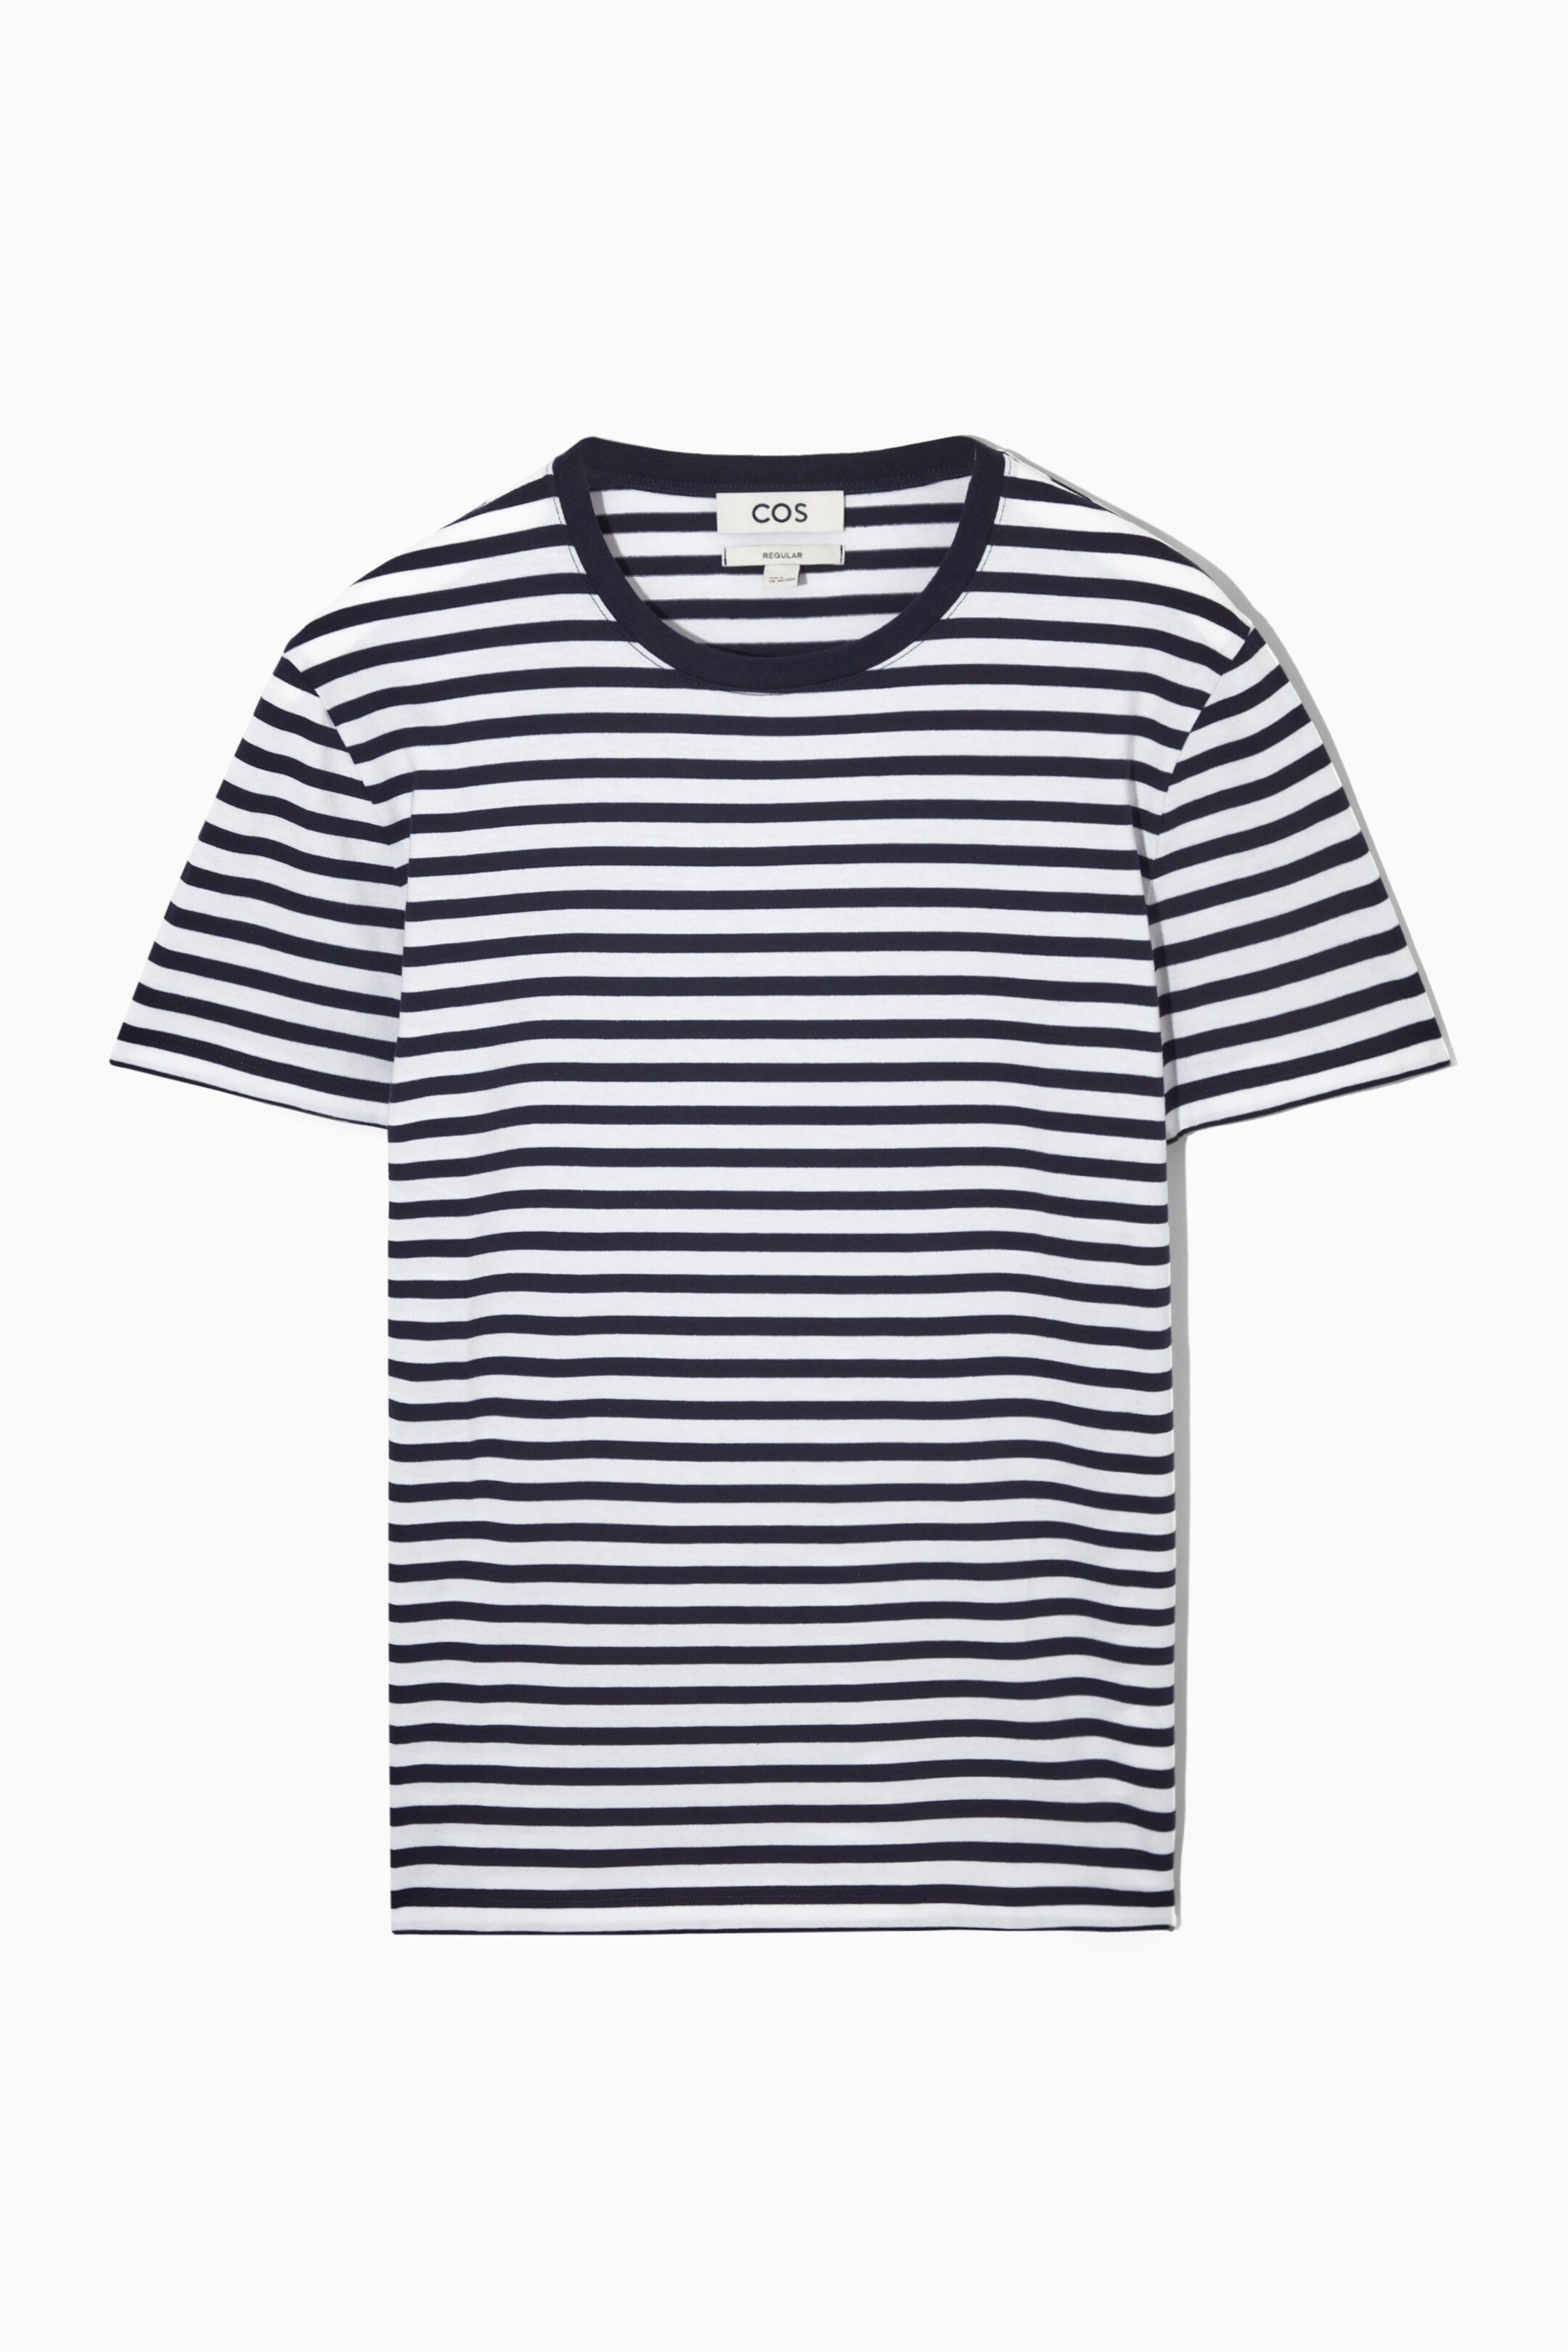 Front image of cos THE EXTRA FINE T-SHIRT in NAVY